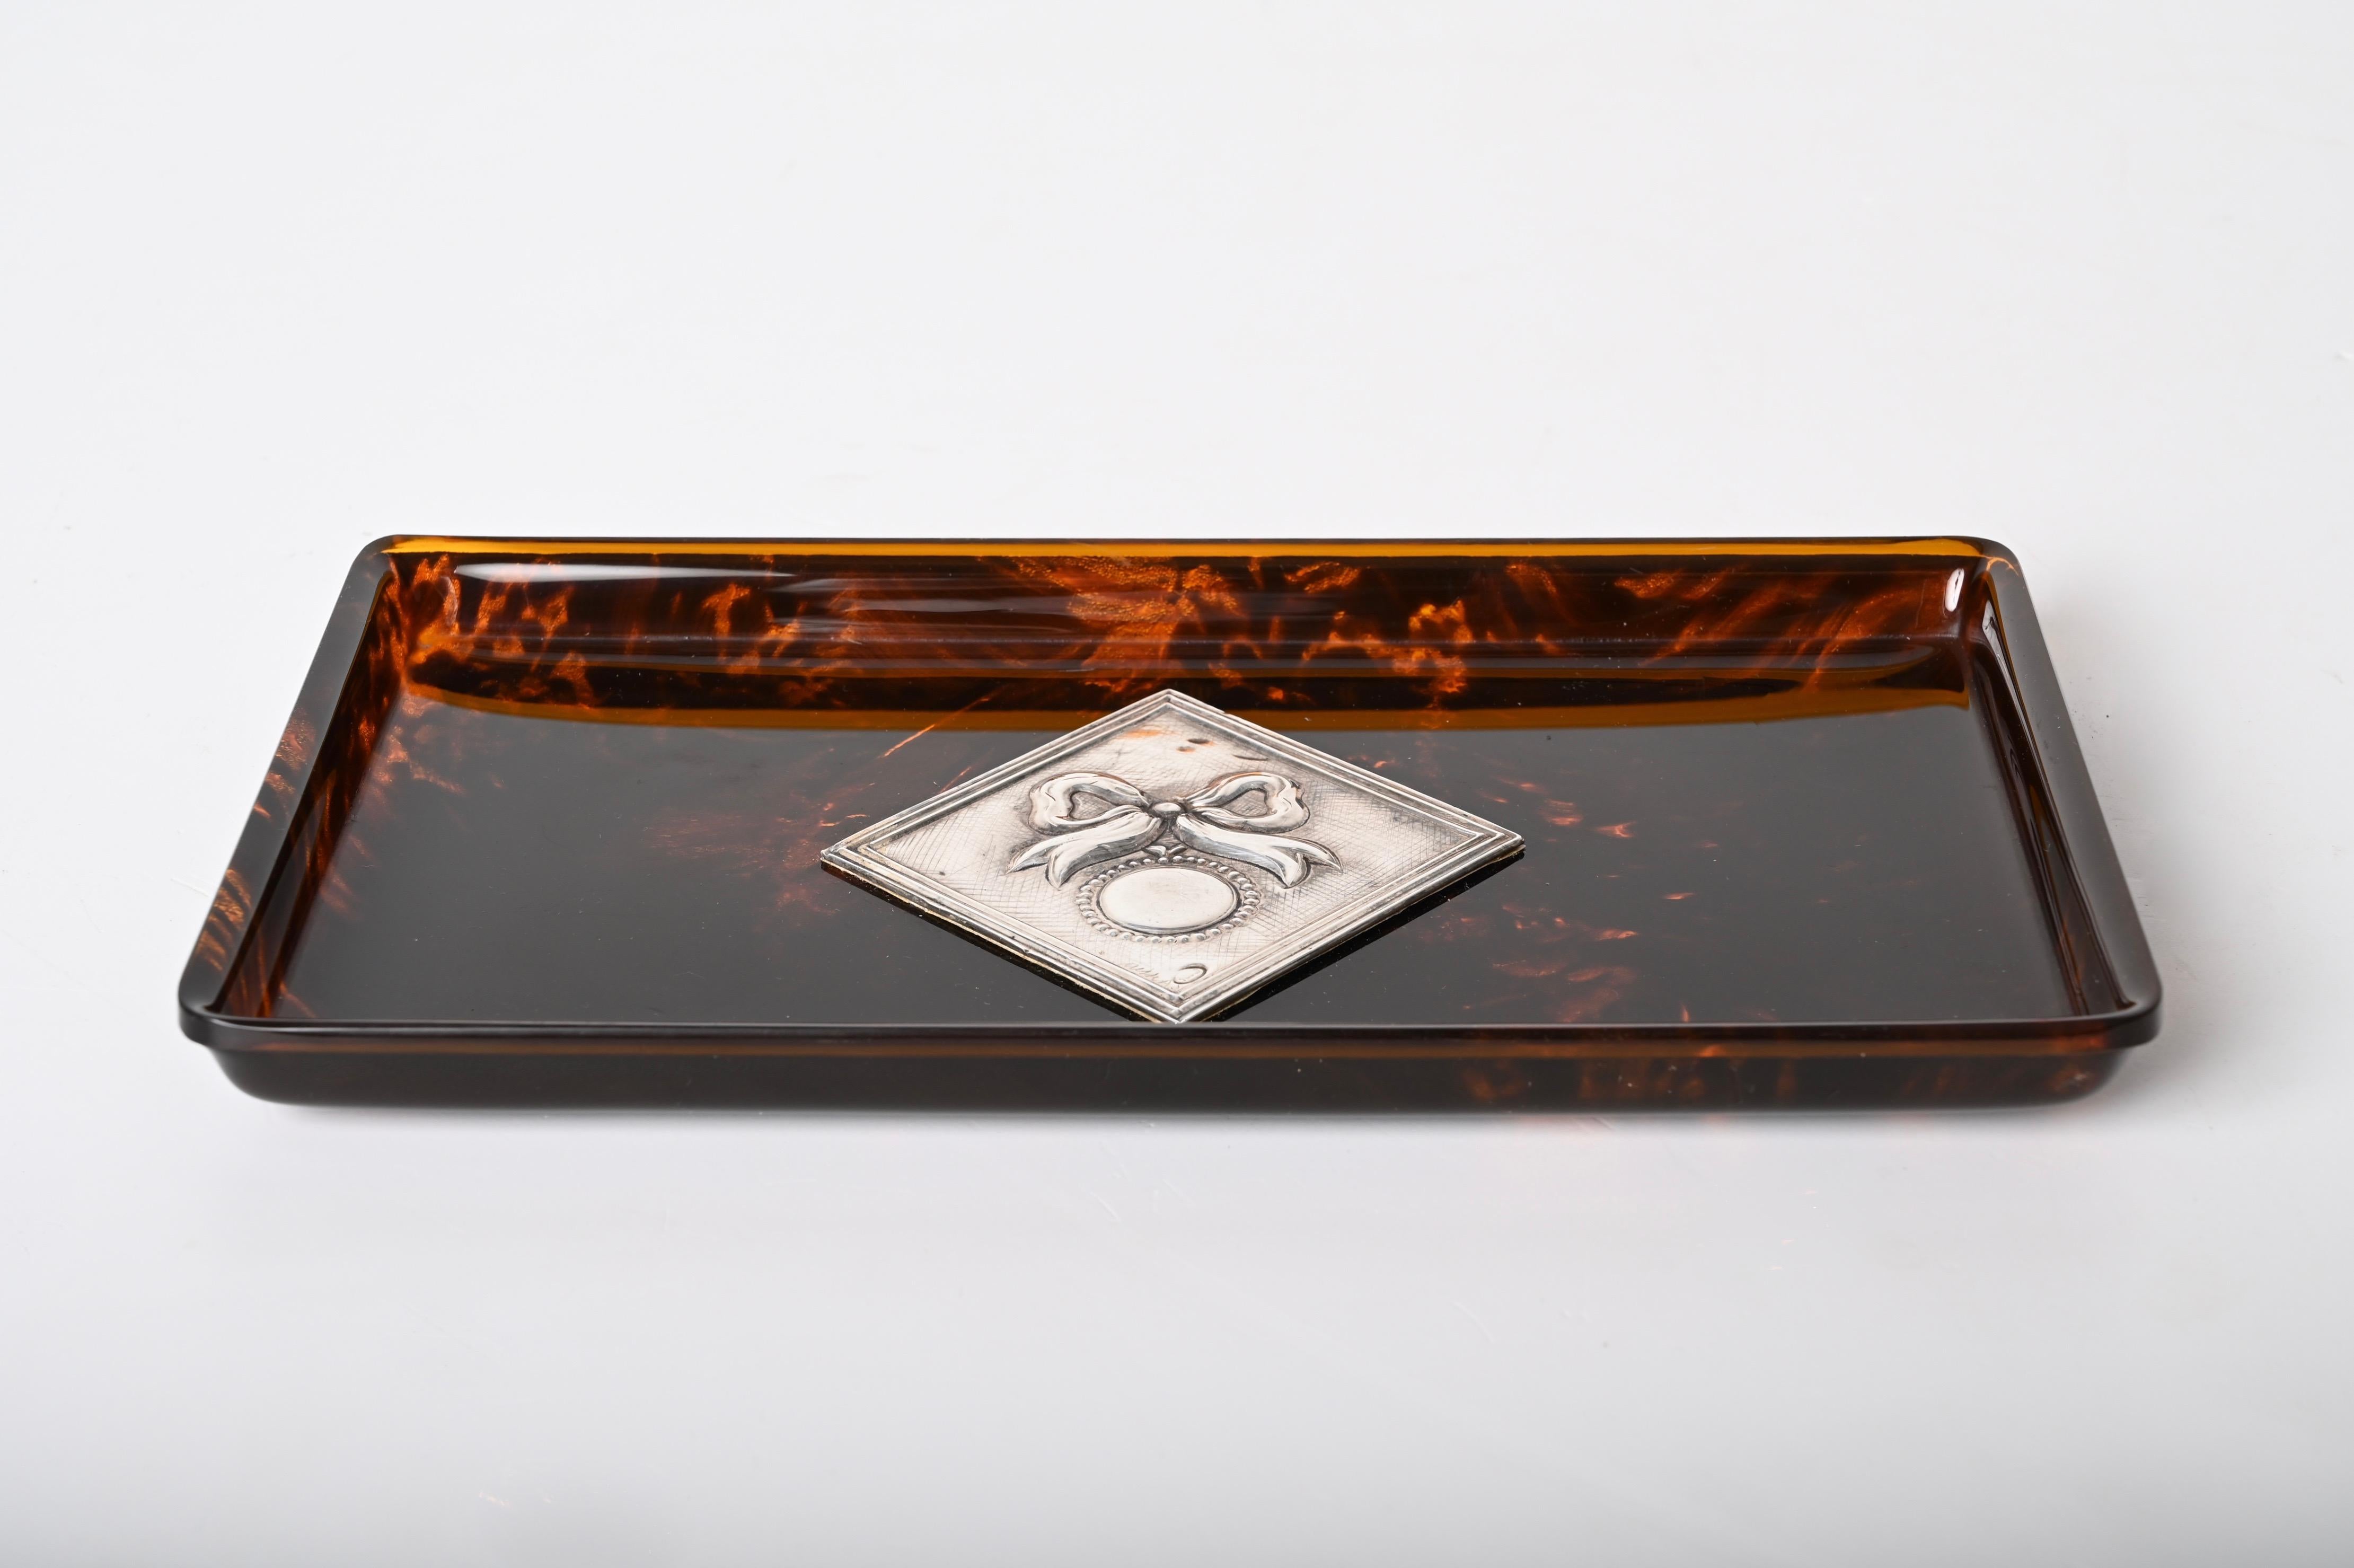 Midcentury Tortoiseshell Lucite and Silver French Serving Tray after Dior, 1970s For Sale 1